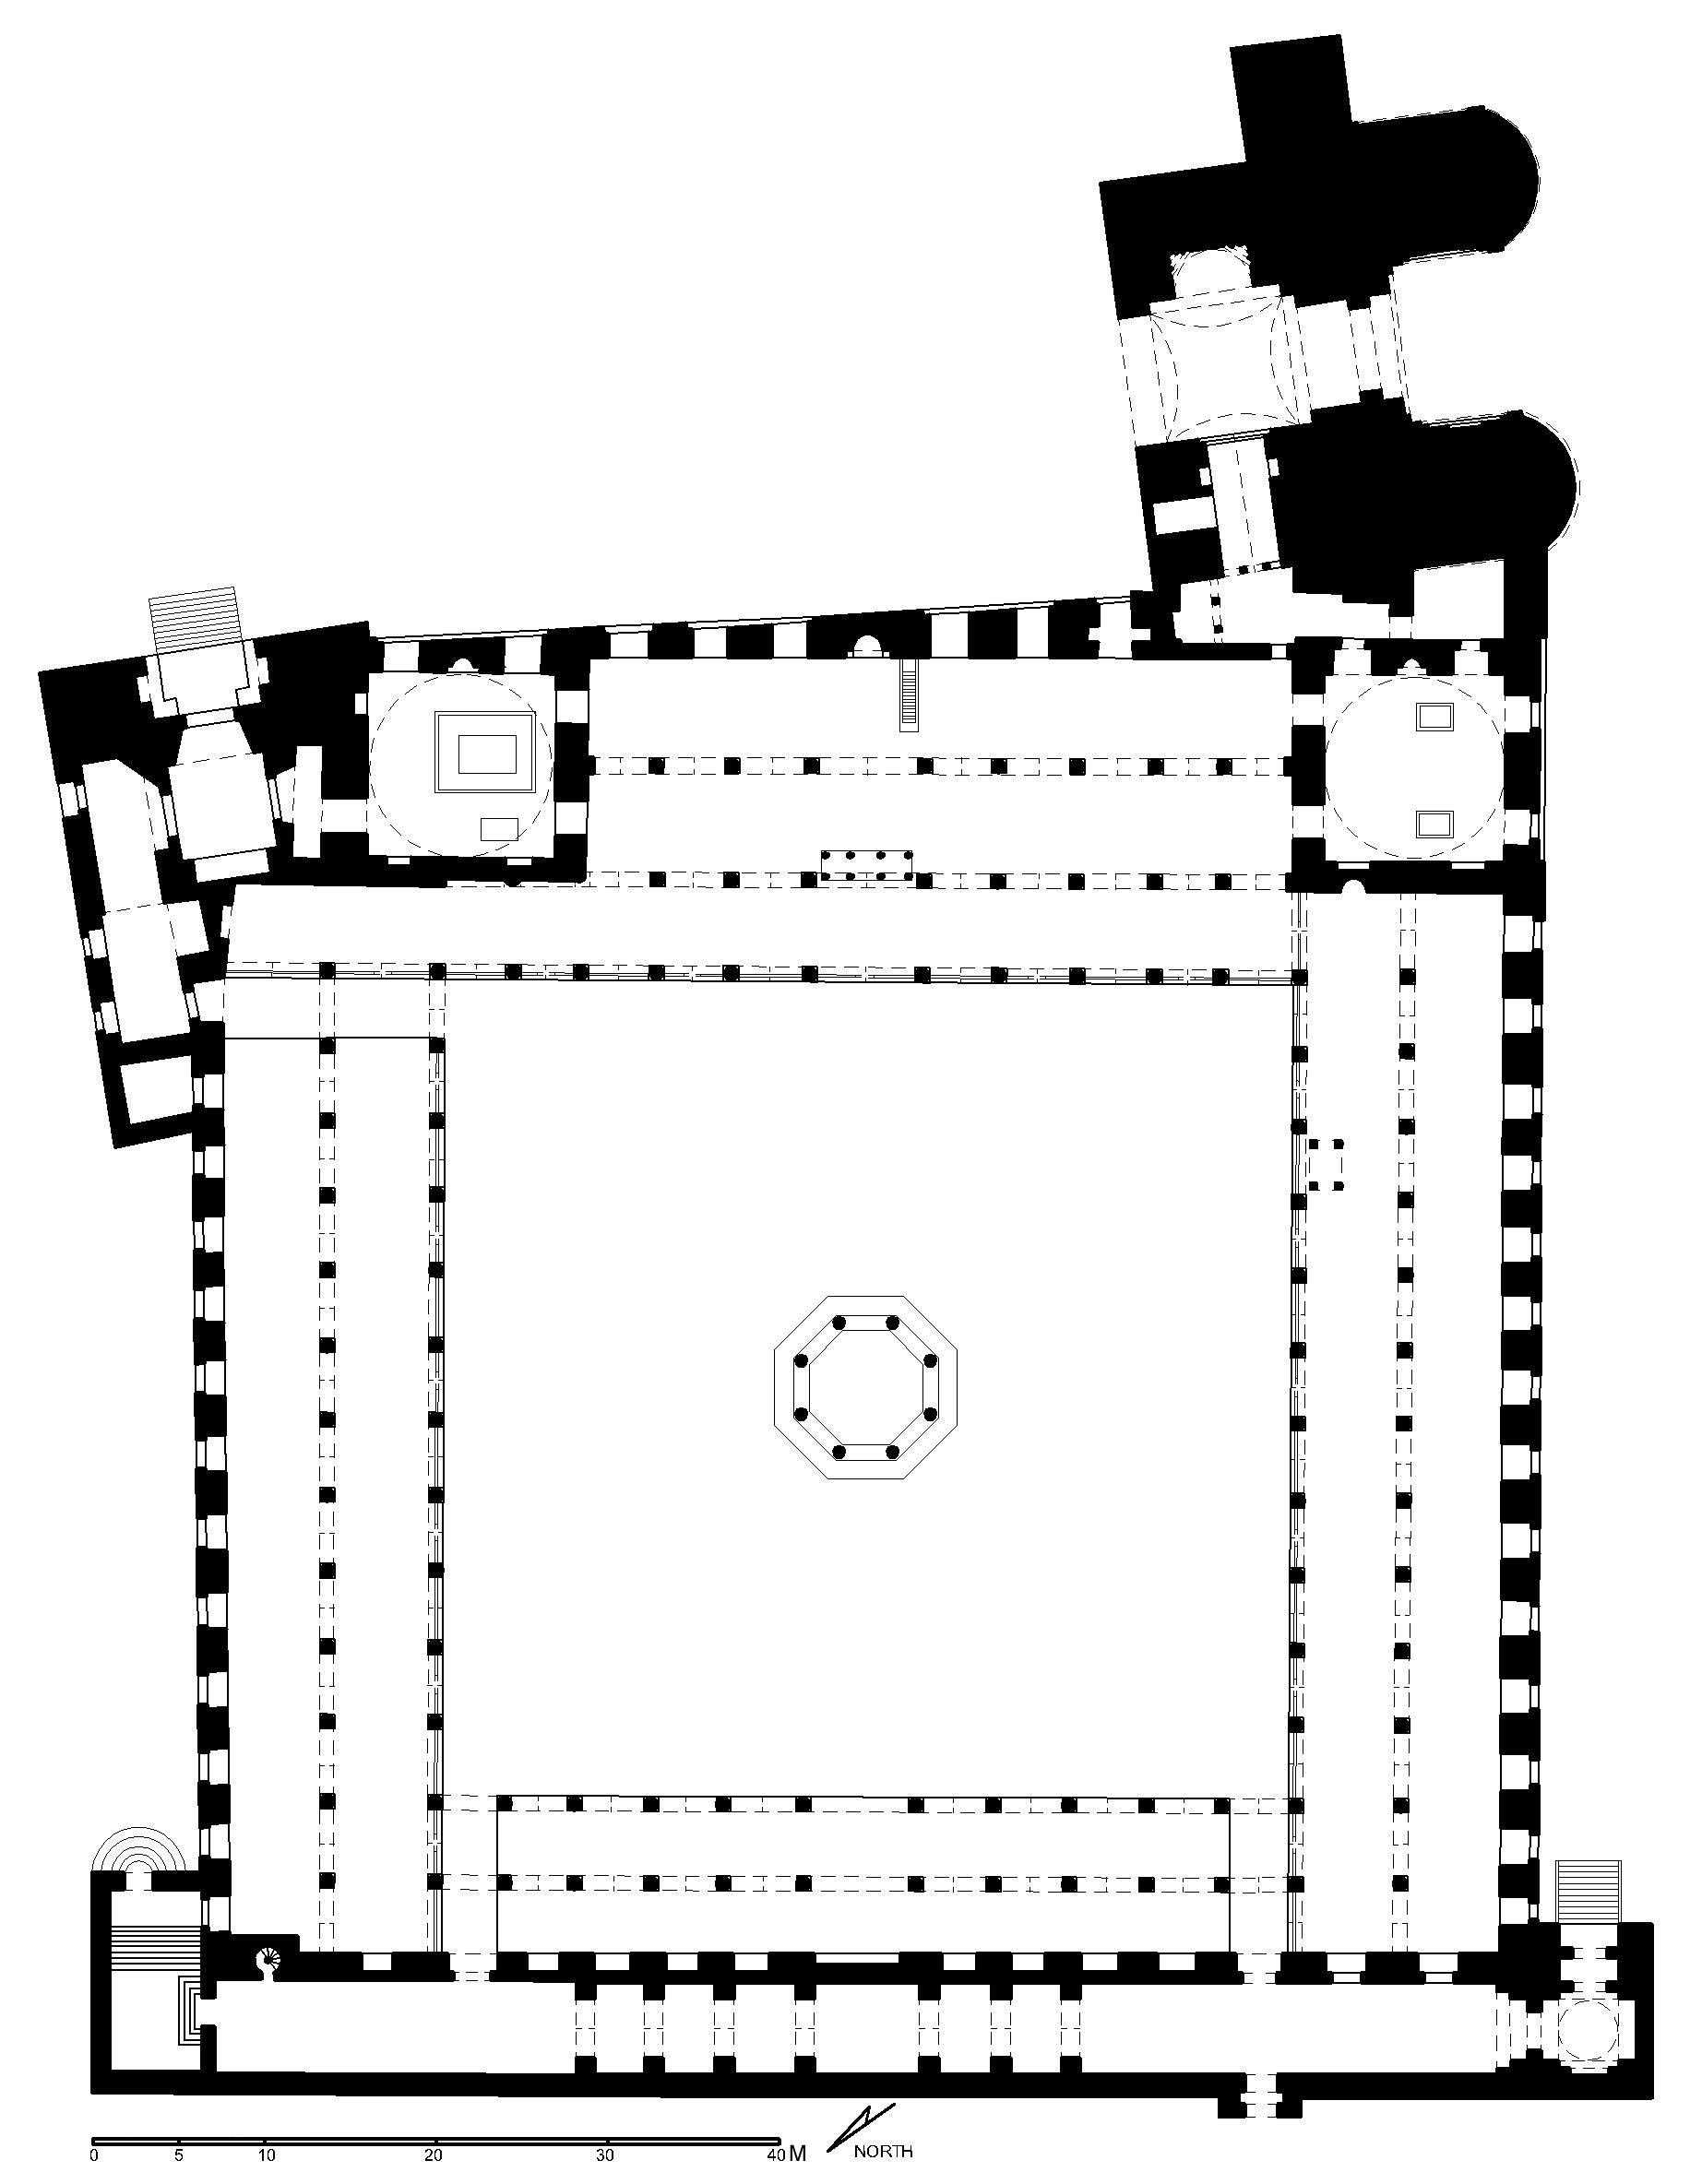 Sultan al-Mu'ayyad Shaykh Complex - Reconstituted  floor plan of mosque complex (after Meinecke) in AutoCAD 2000 format. Click the download button to download a zipped file containing the .dwg file.